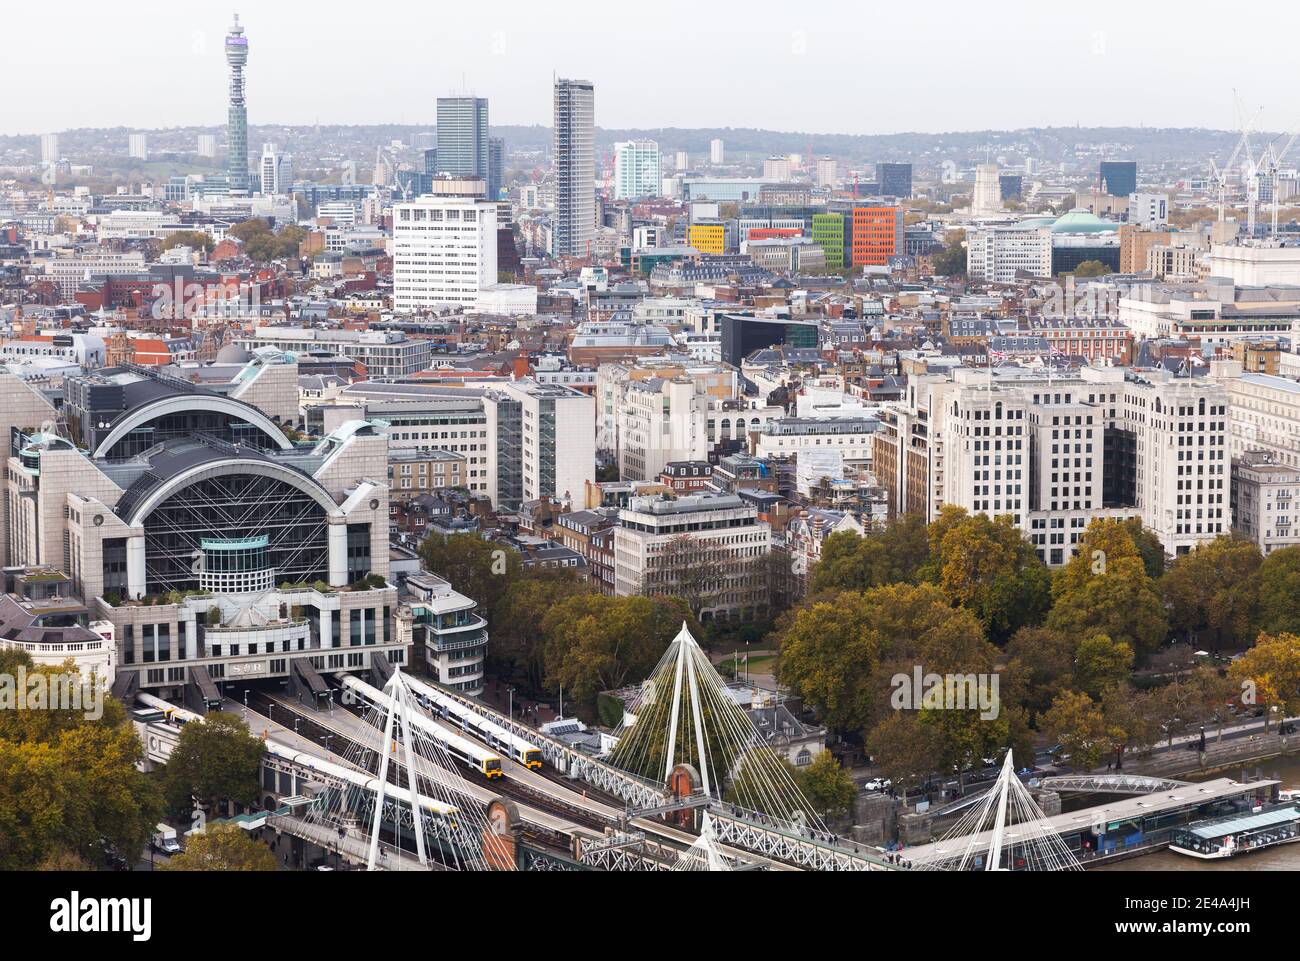 London, United Kingdom - October 31, 2017: London cityscape, aerial view showing Waterloo station with approaching trains Stock Photo